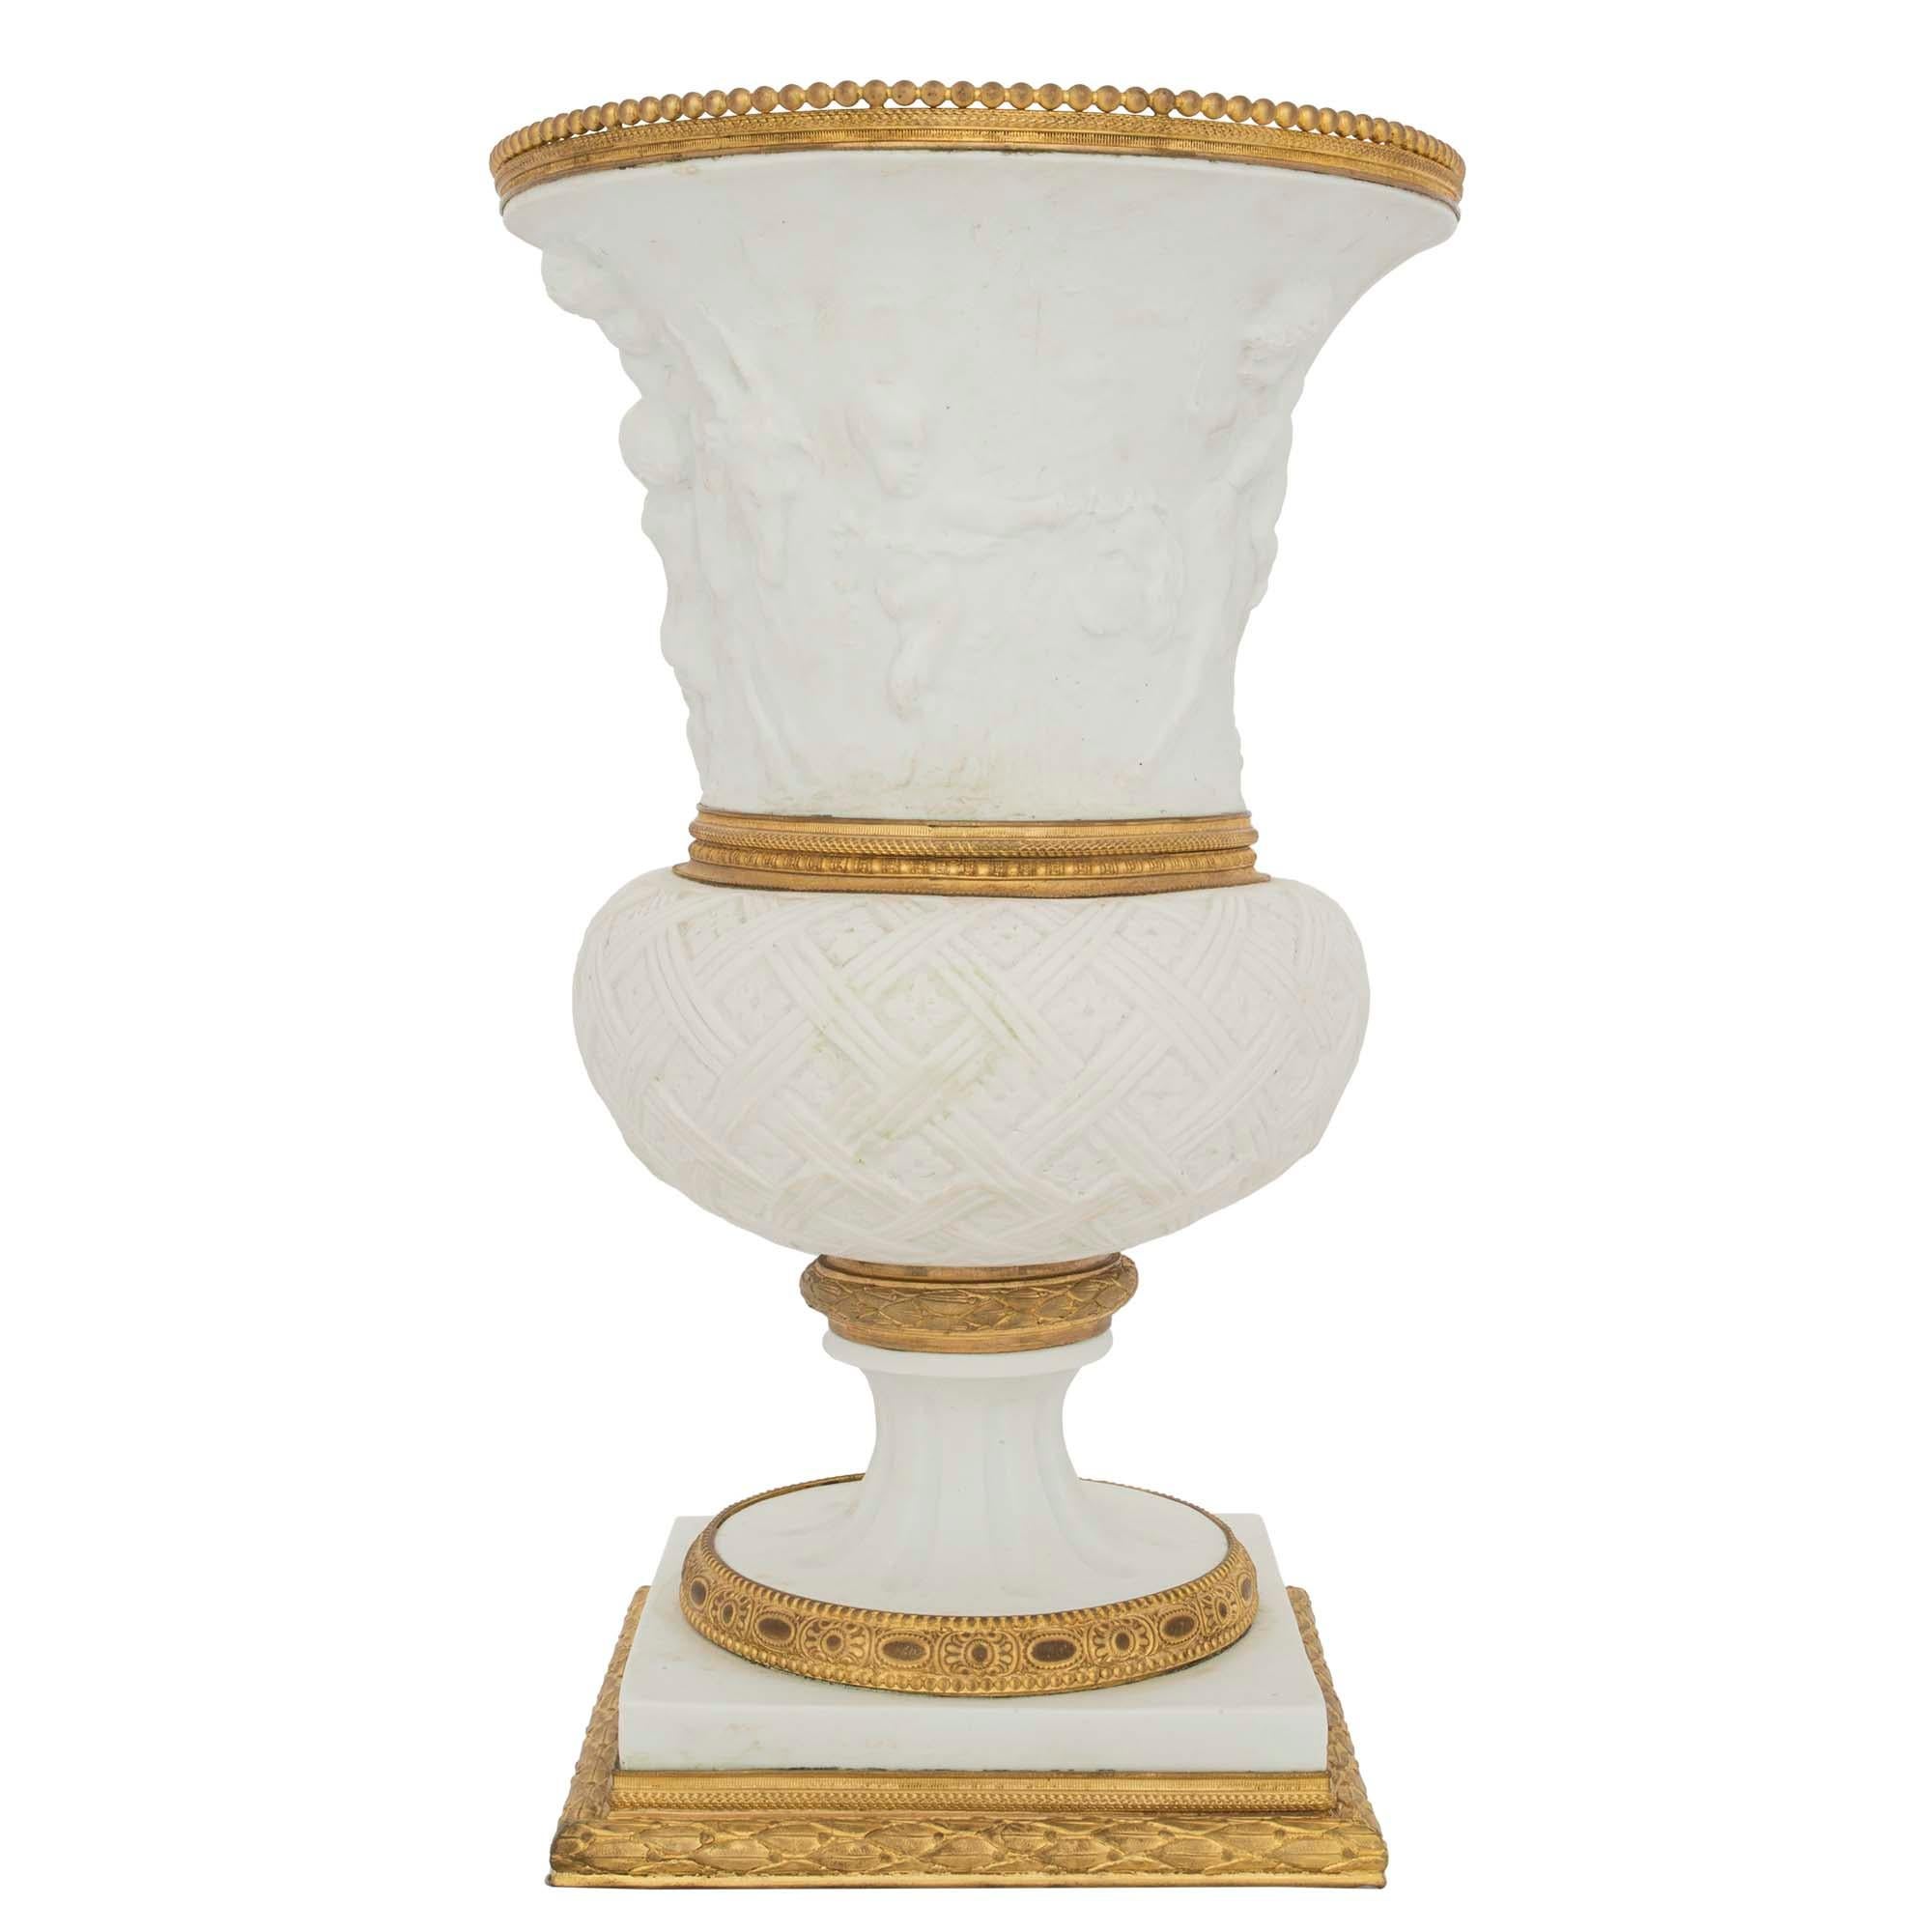 French 19th Century Louis XVI Style Porcelain and Ormolu Medici Designed Vase For Sale 1